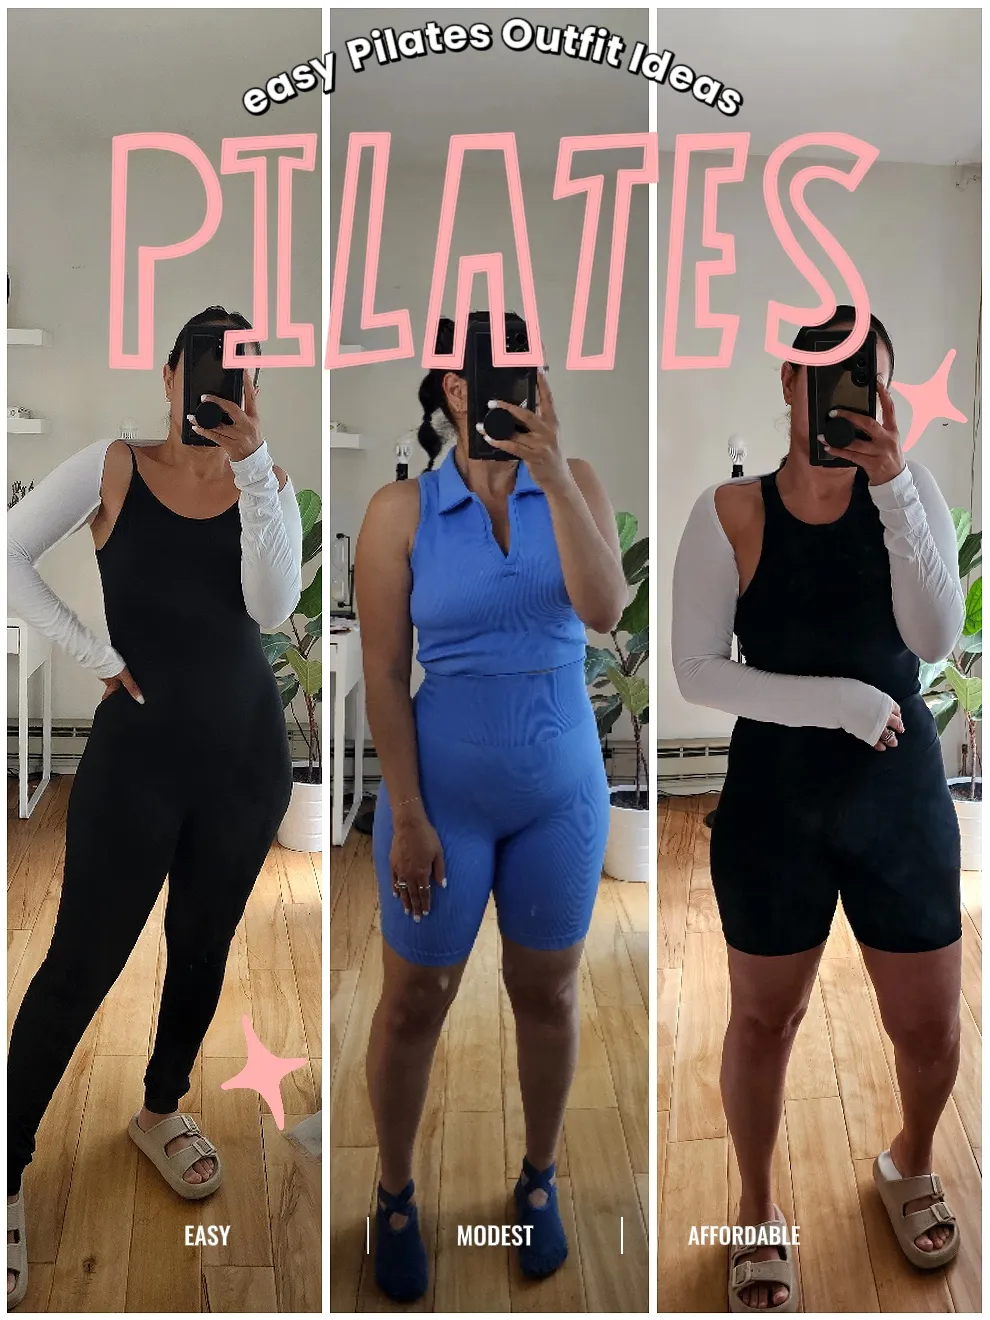 What we wore to class today #pilates #pilatesoutfit #pilatesootd